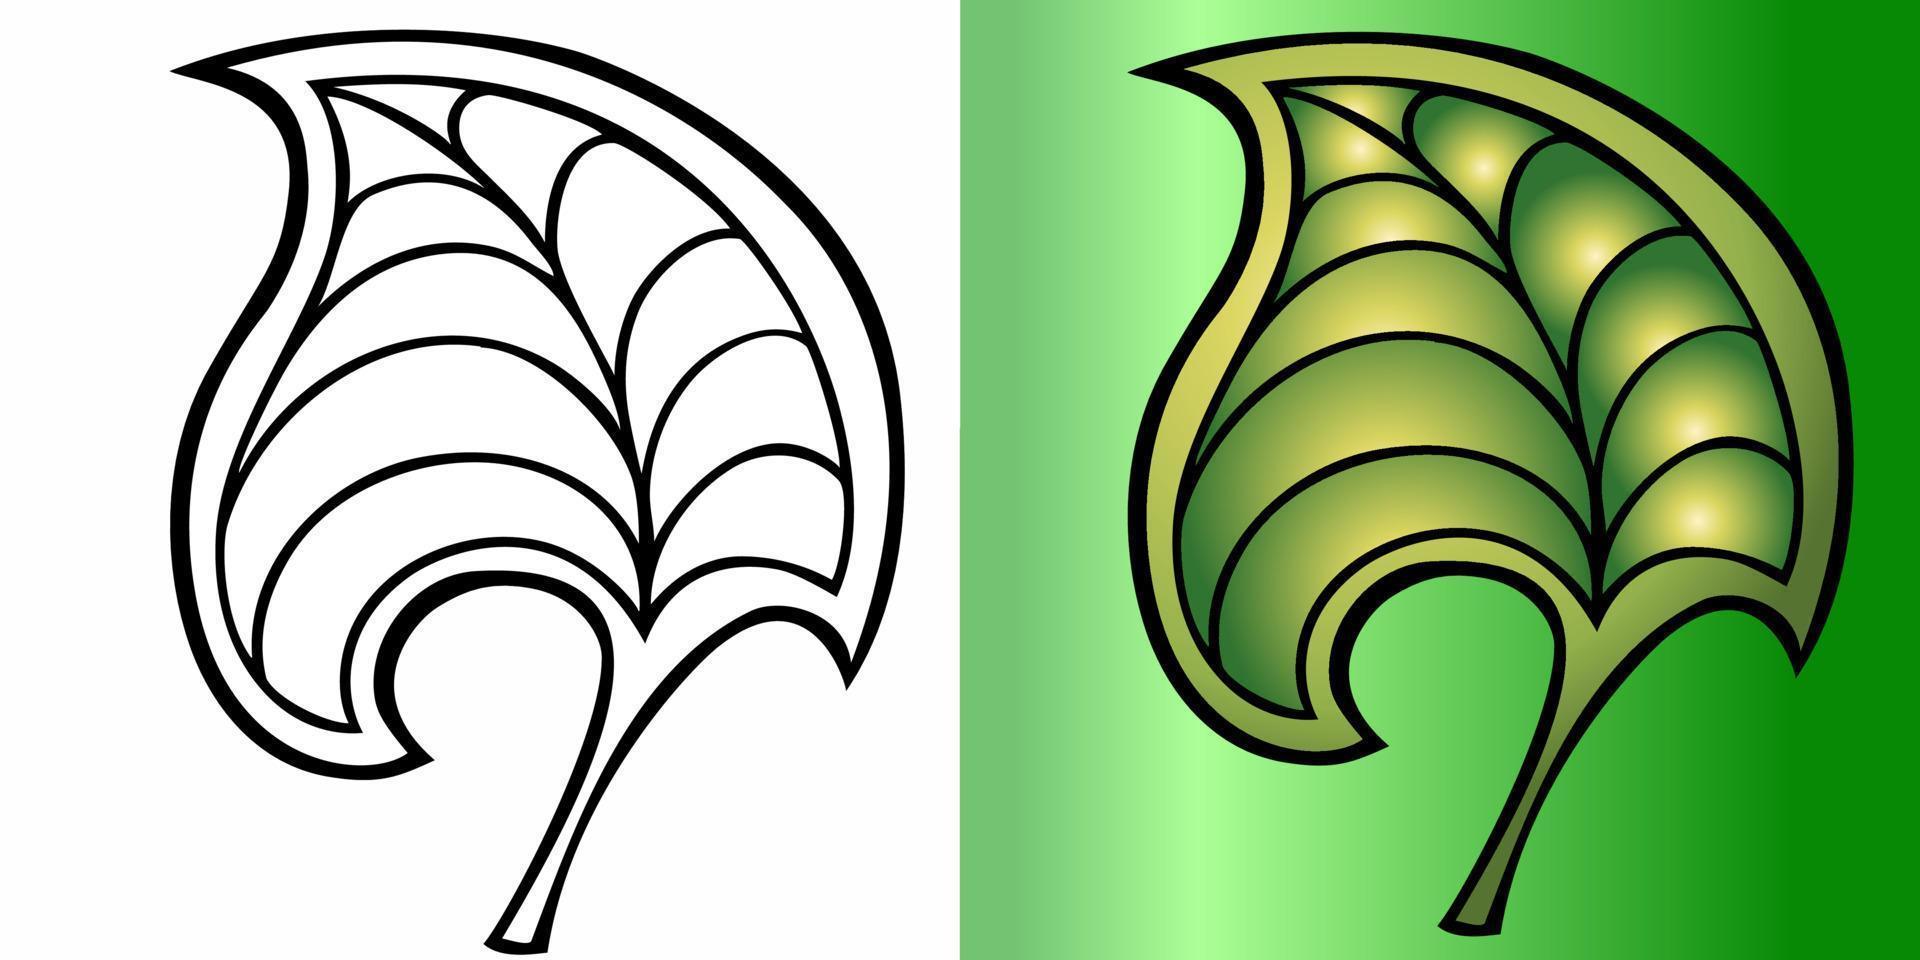 Vector illustration. Set of two decorative leaves in black and white and color